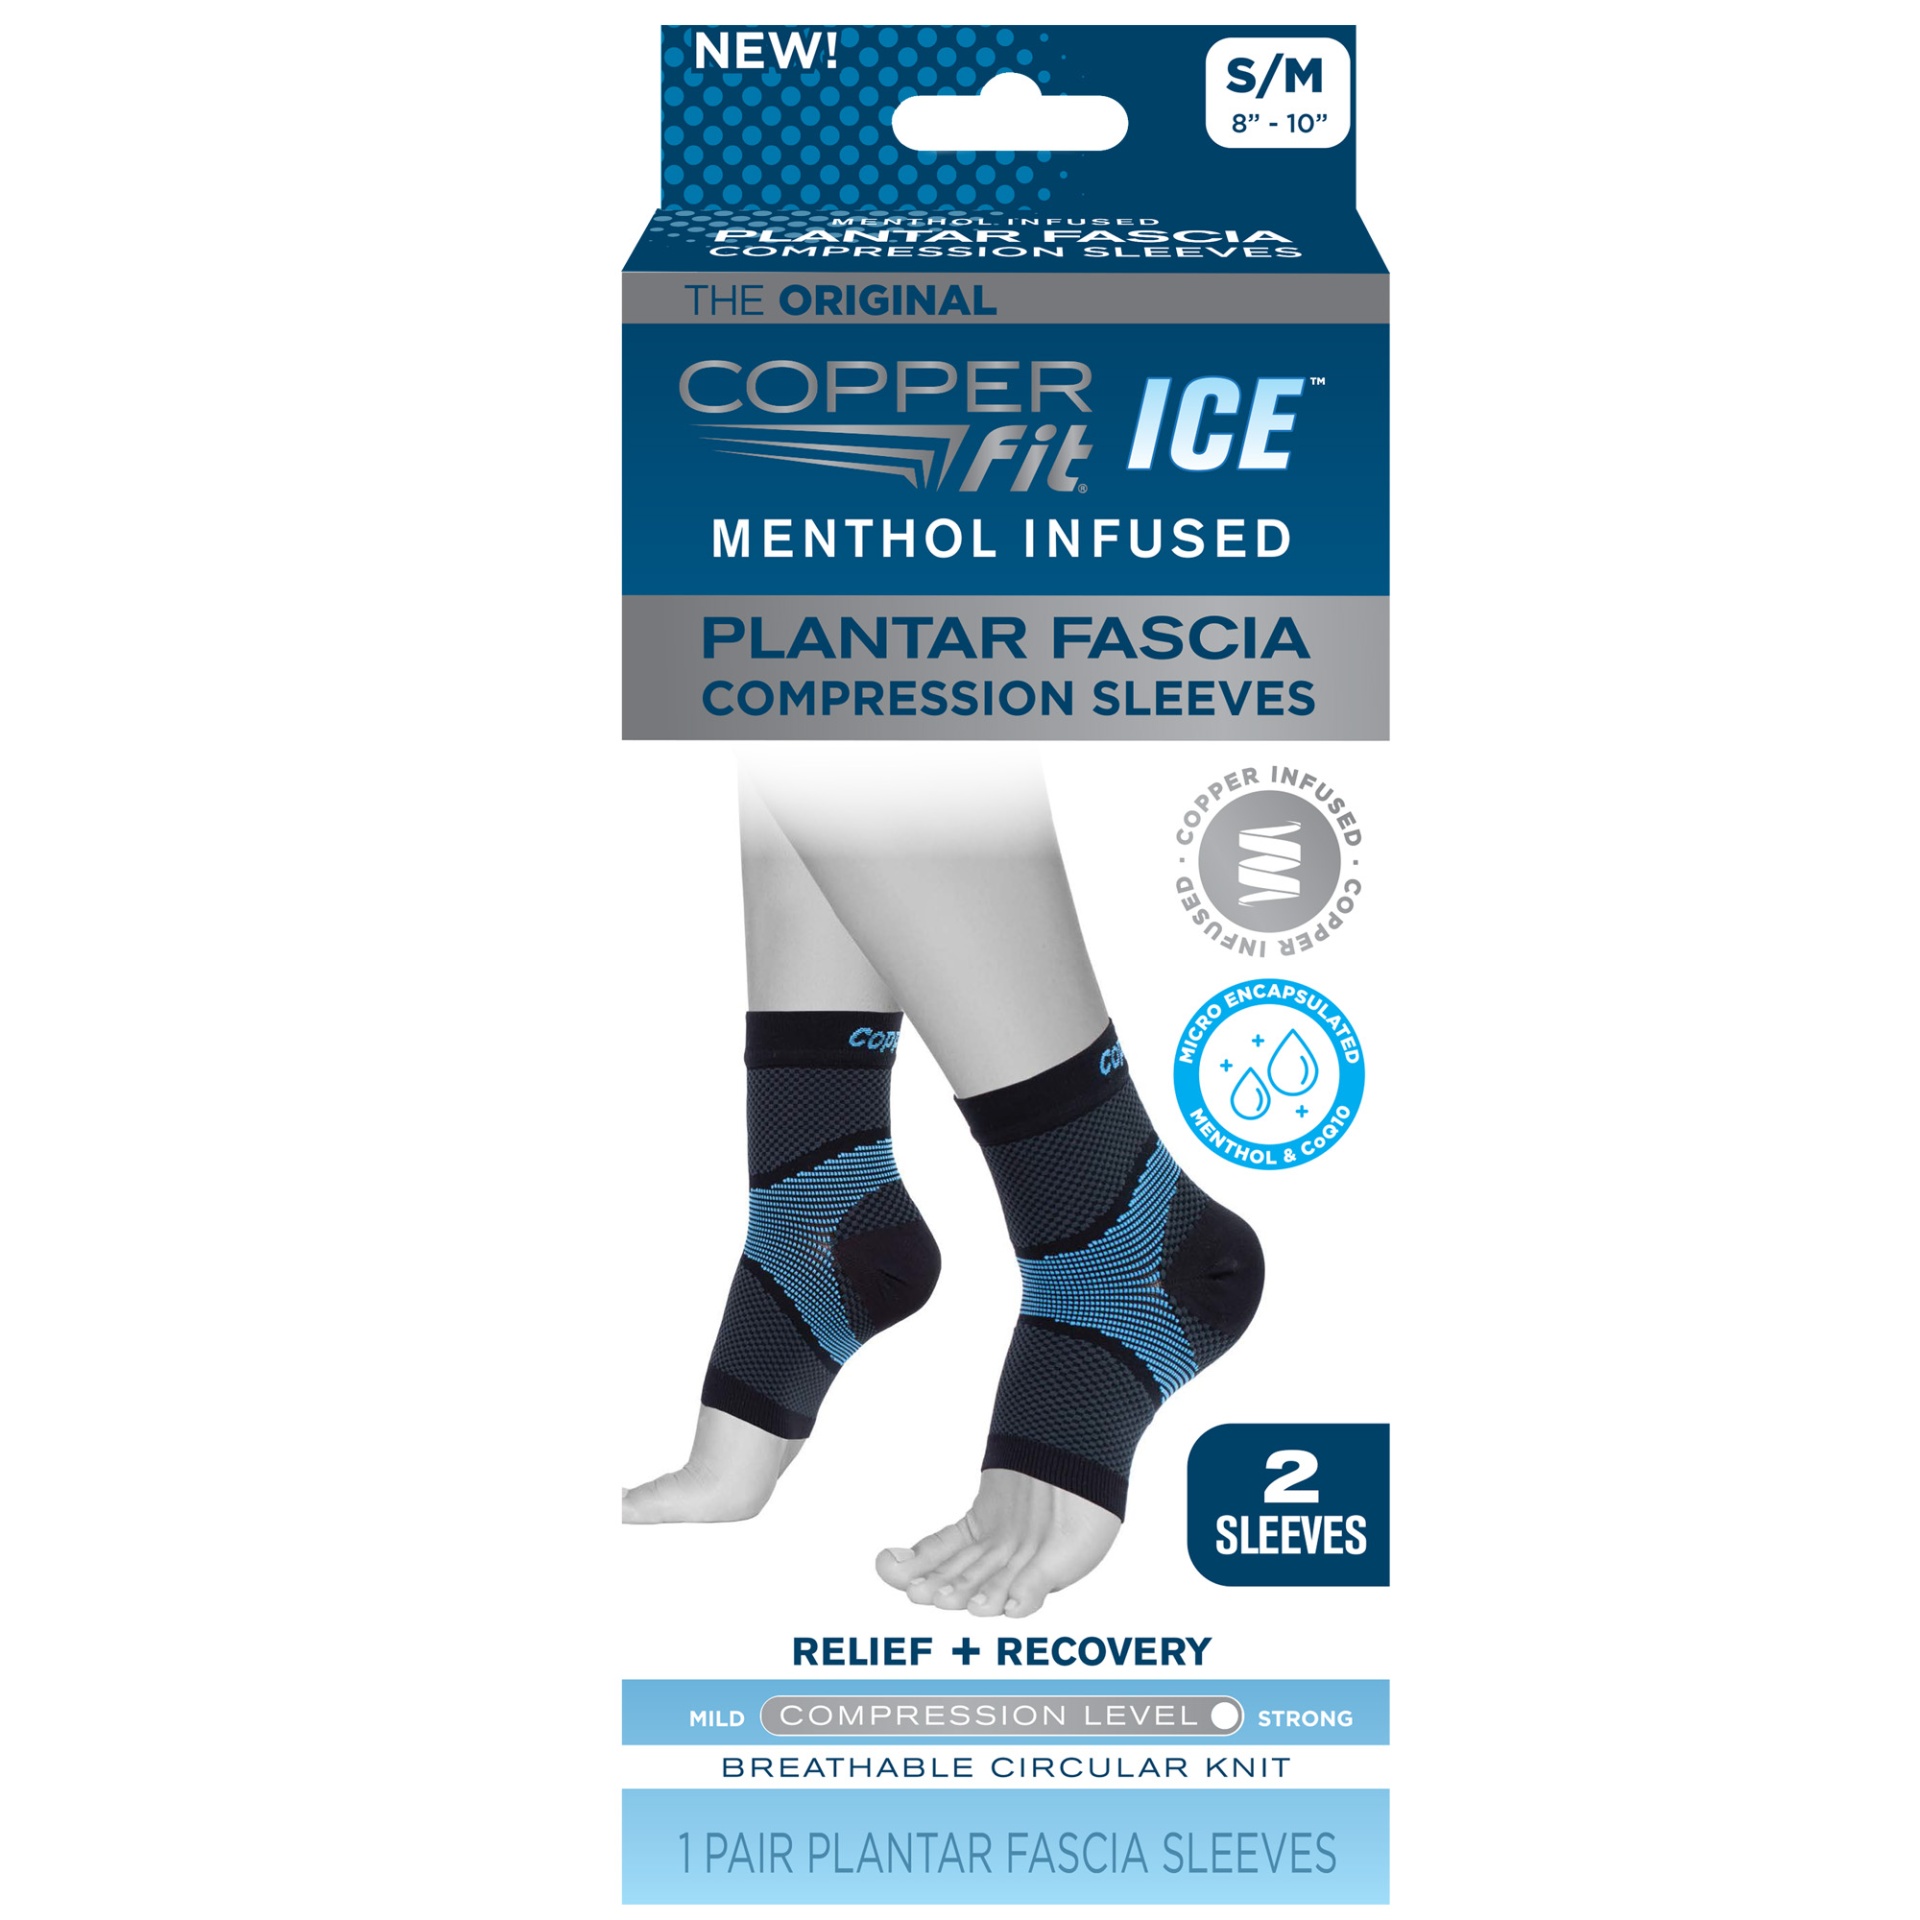 Copper Fit ICE Menthol Infused Plantar Fascia Compression Sleeves s/m